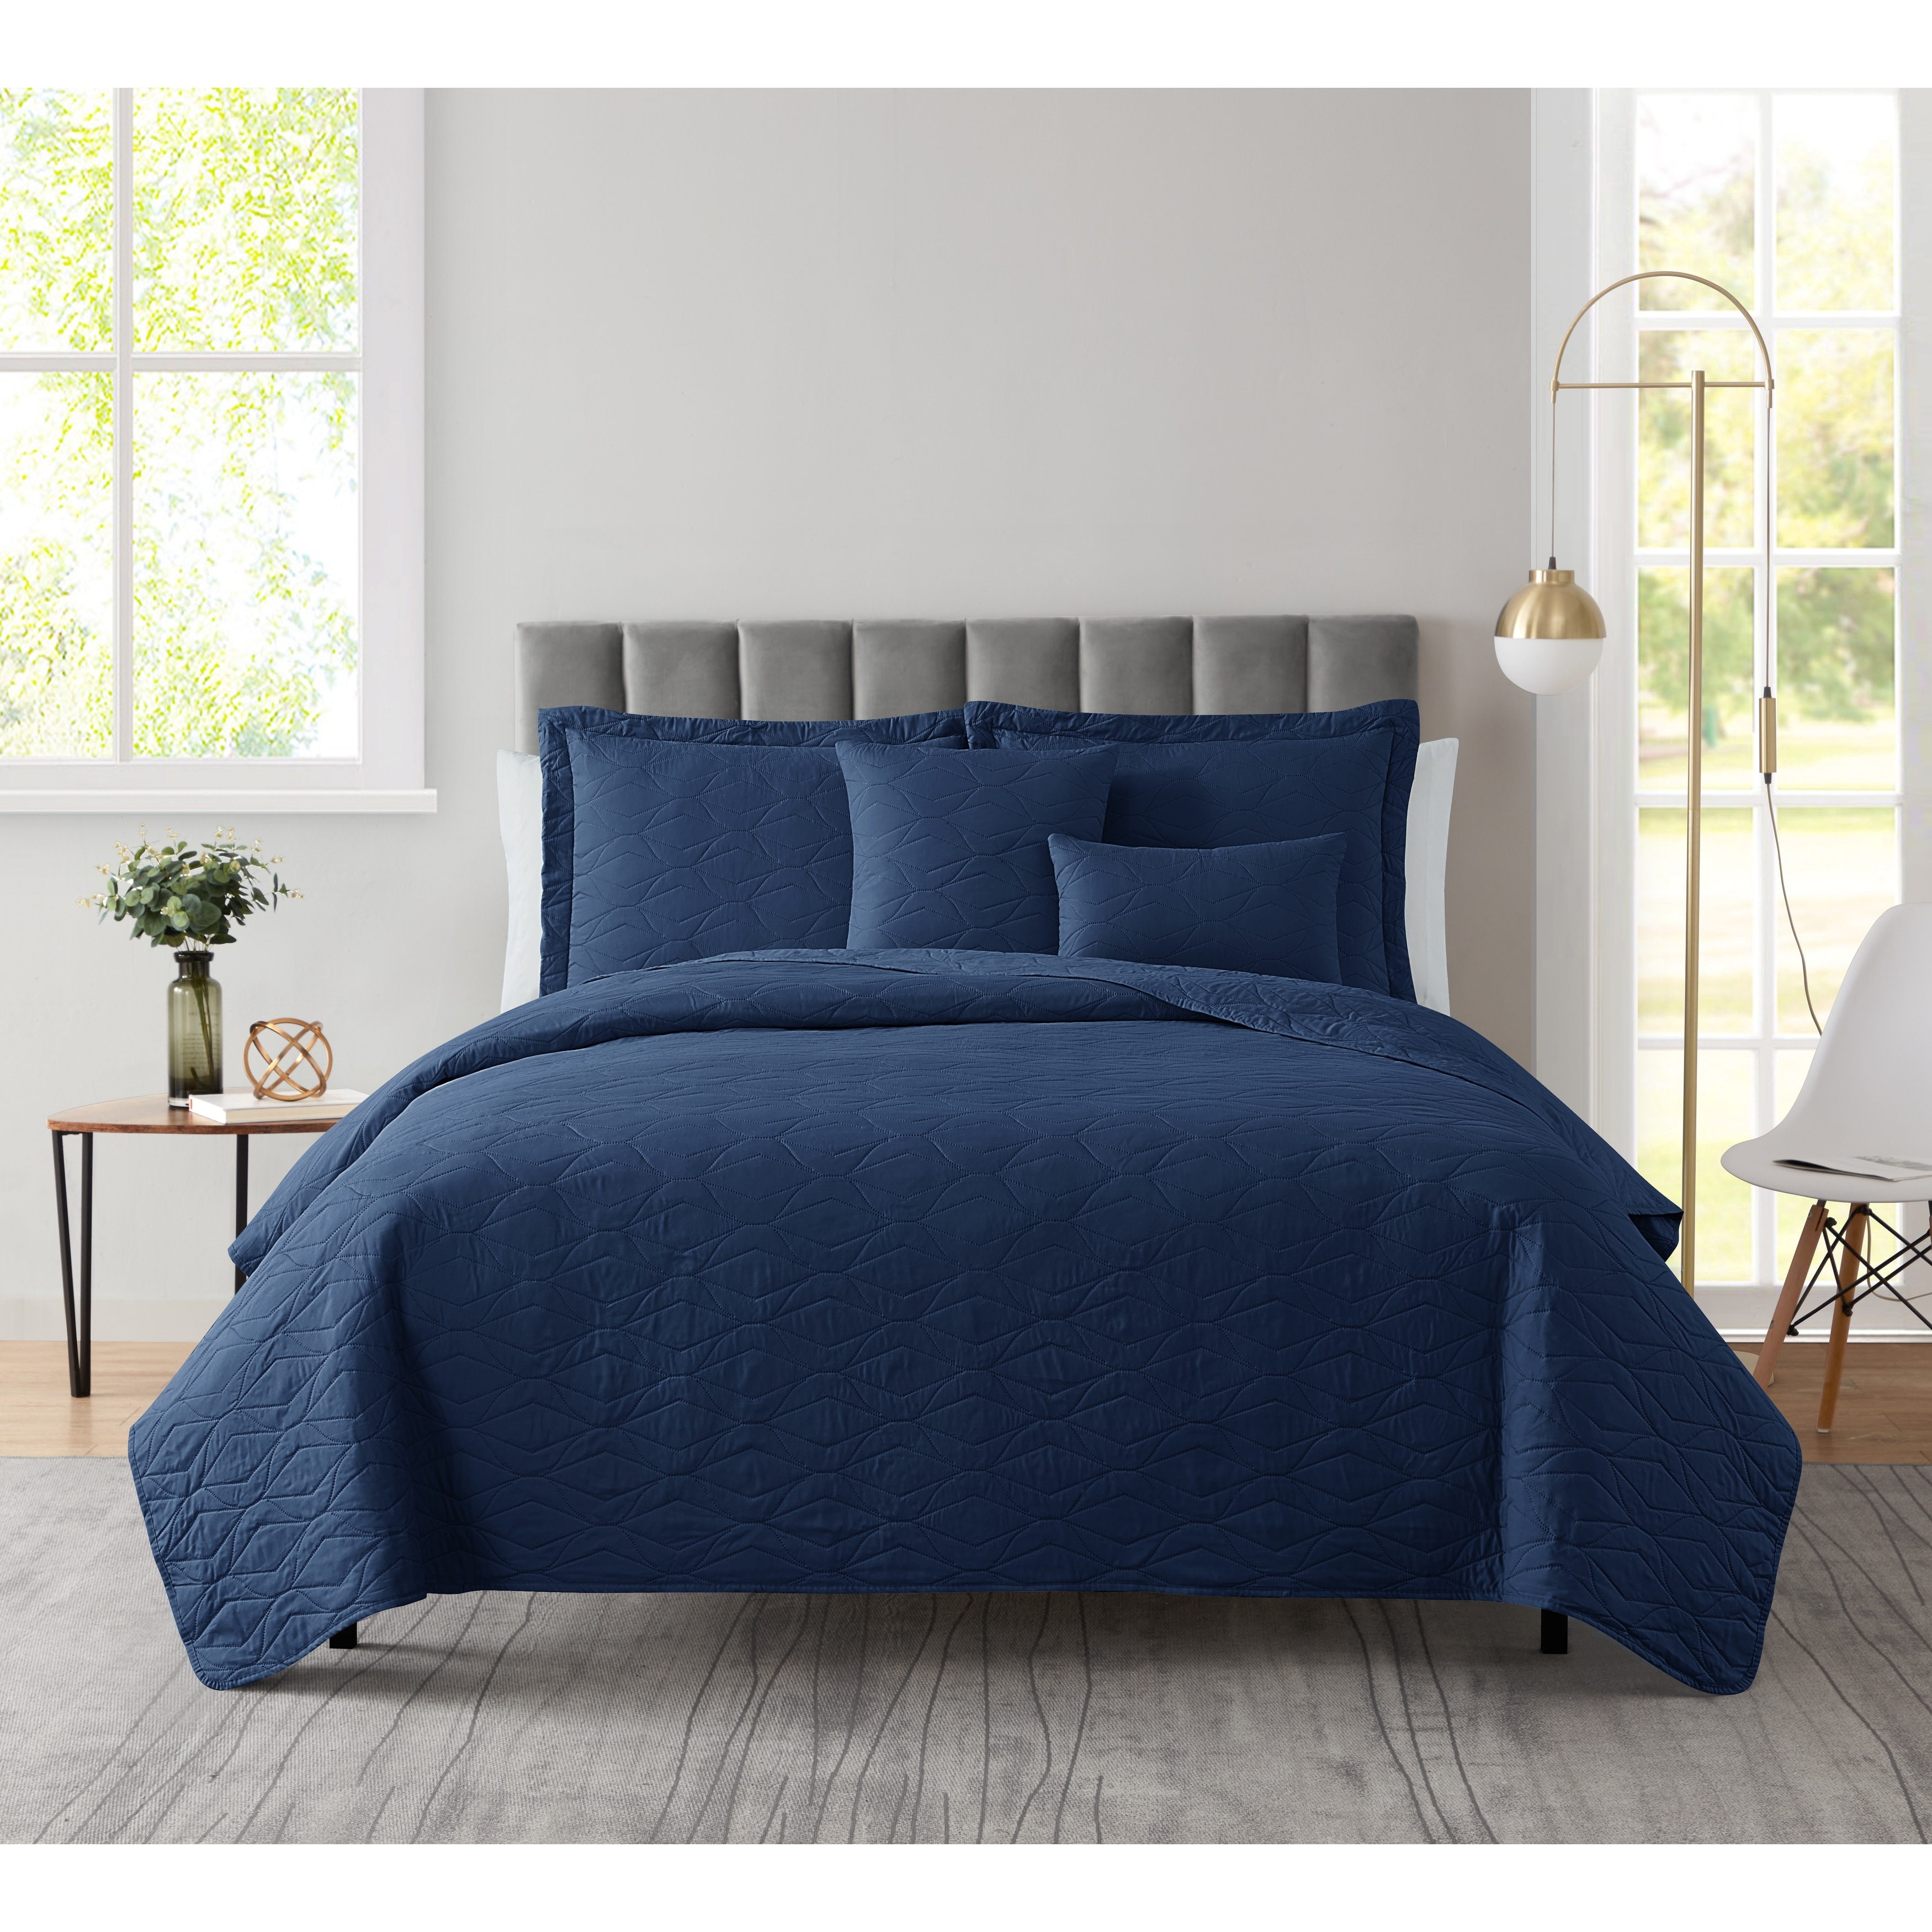 Pinsonic Quilted Oversize Bedspread Coverlet Double or King Size Next Day Uk 